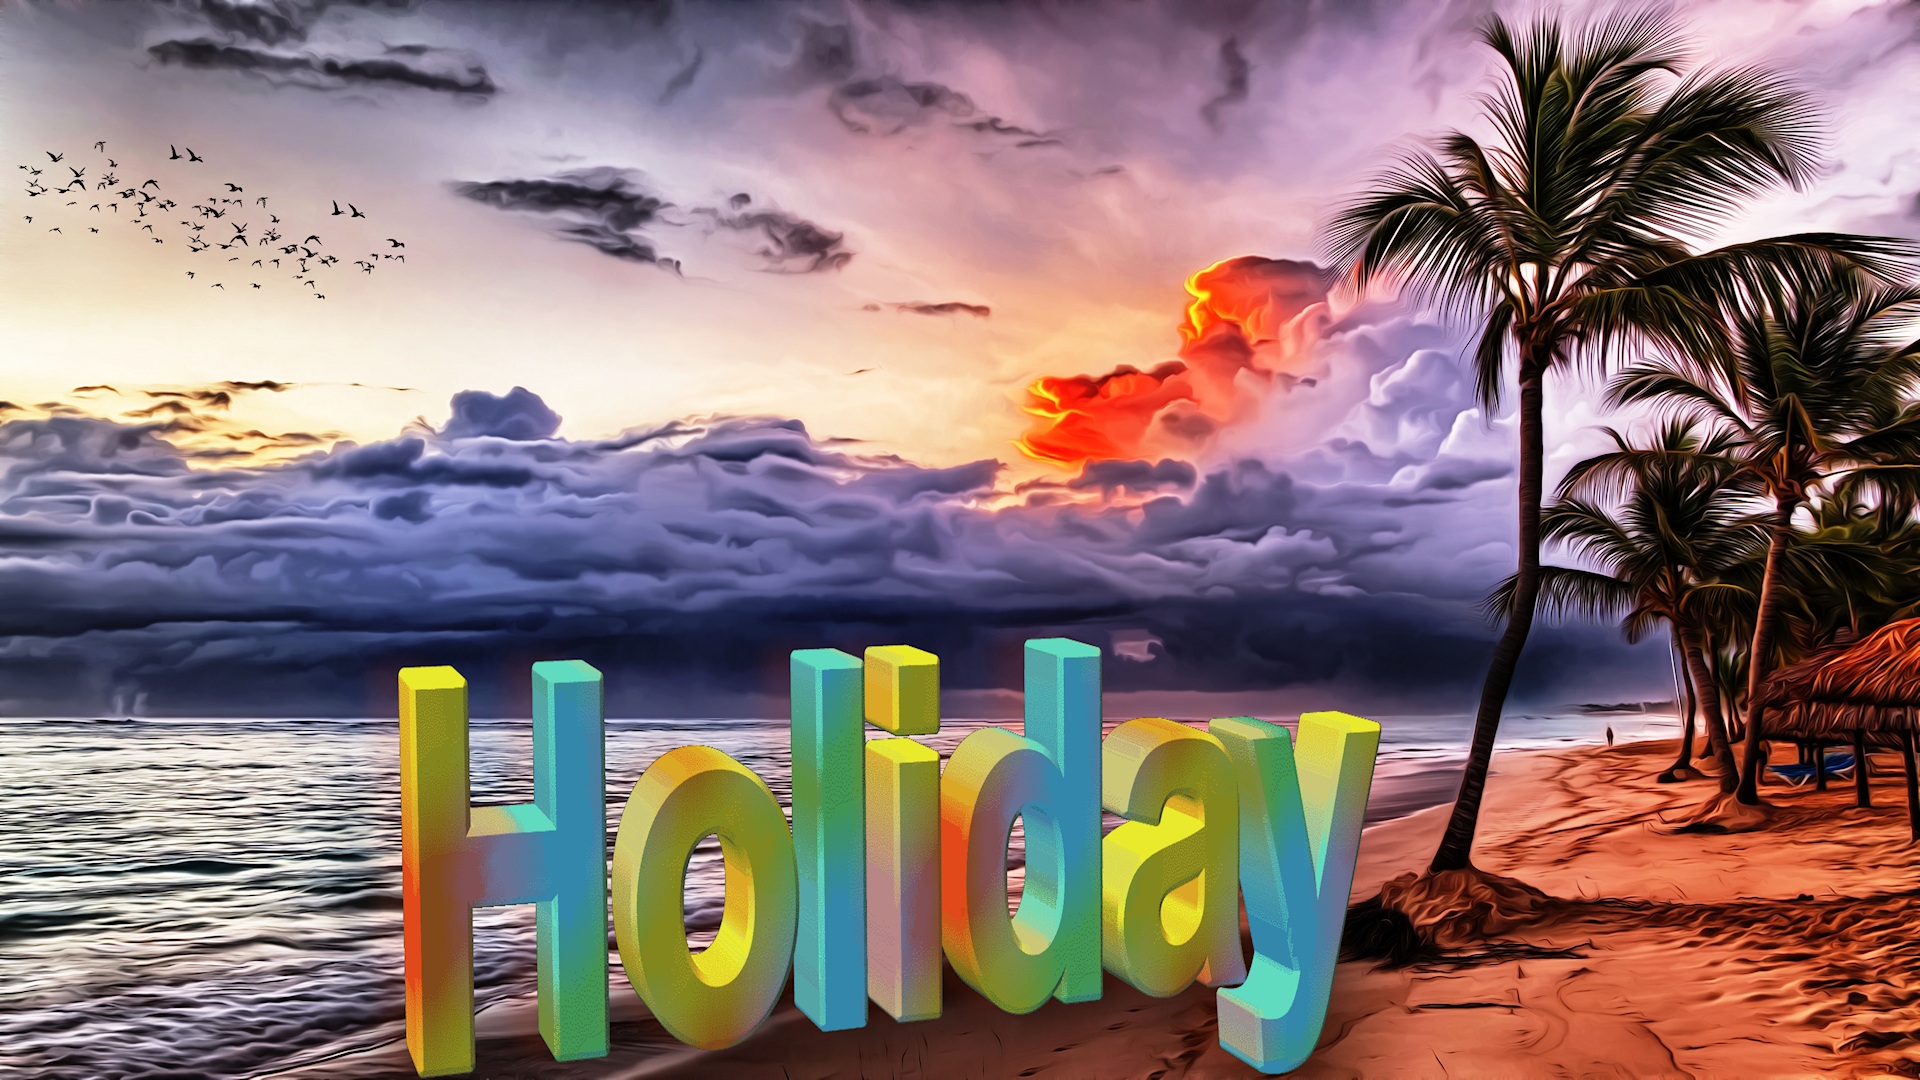 Vacations holidays beach view free image download